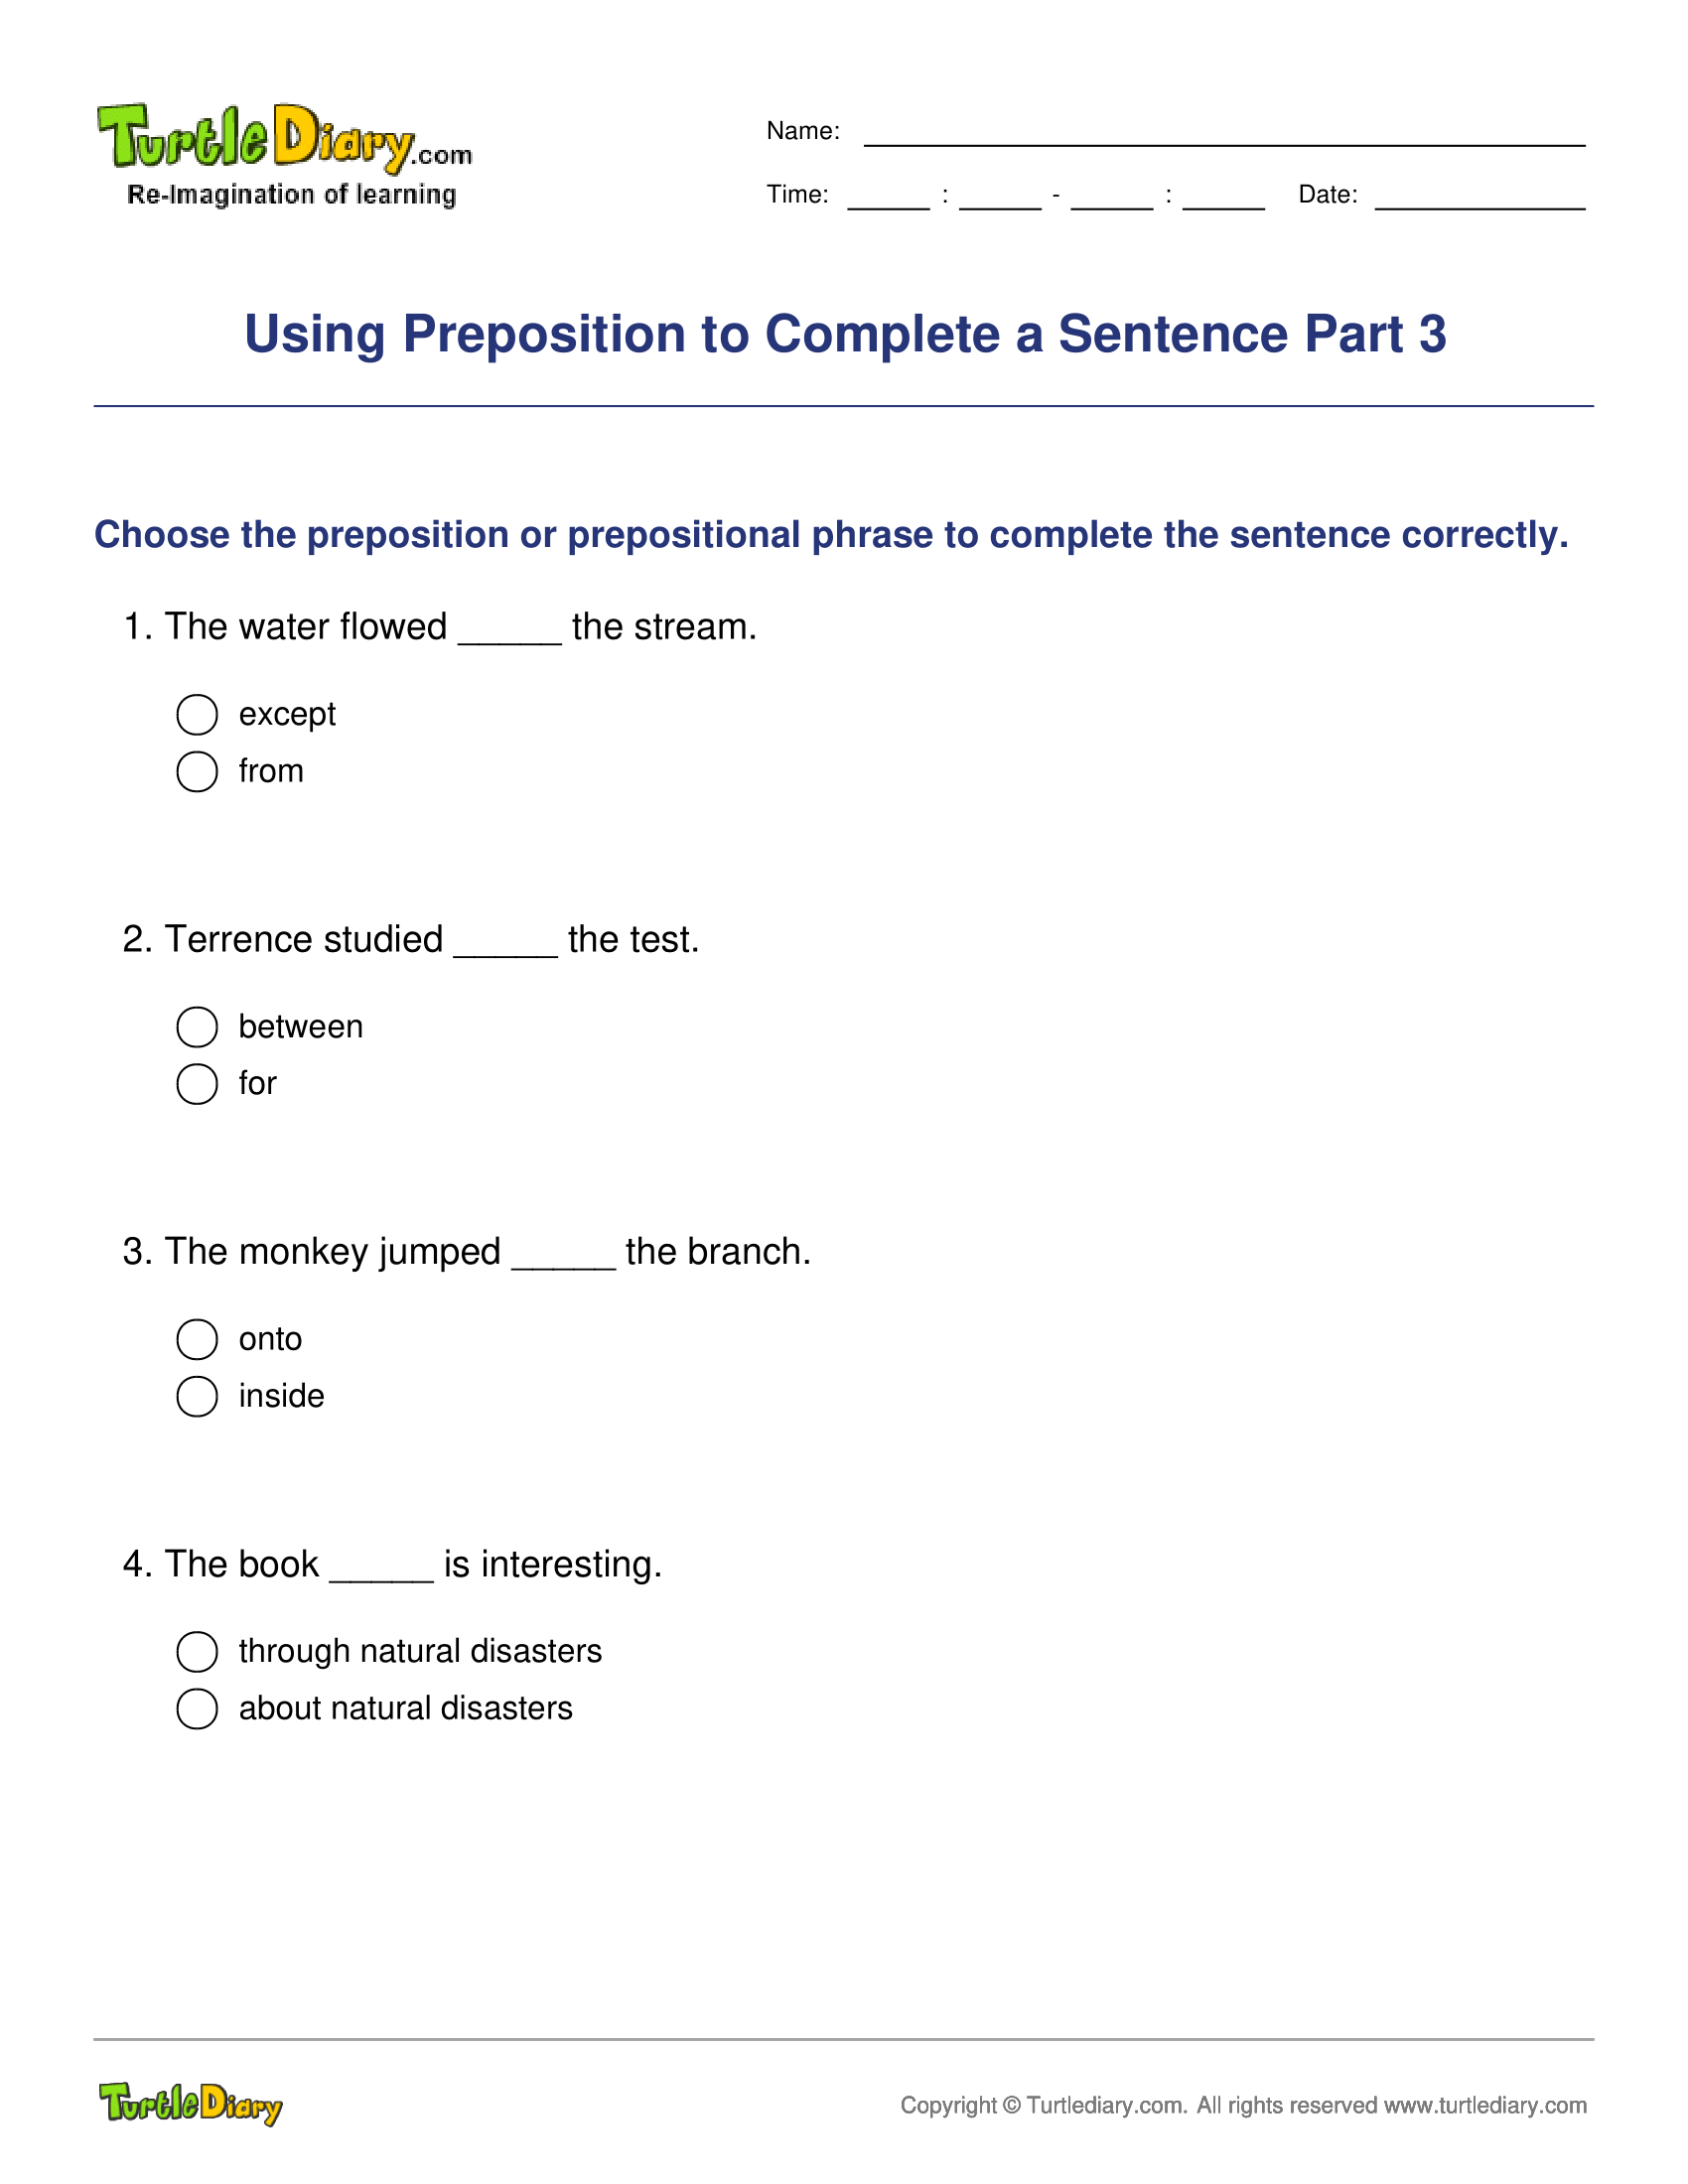 Using Preposition to Complete a Sentence Part 3